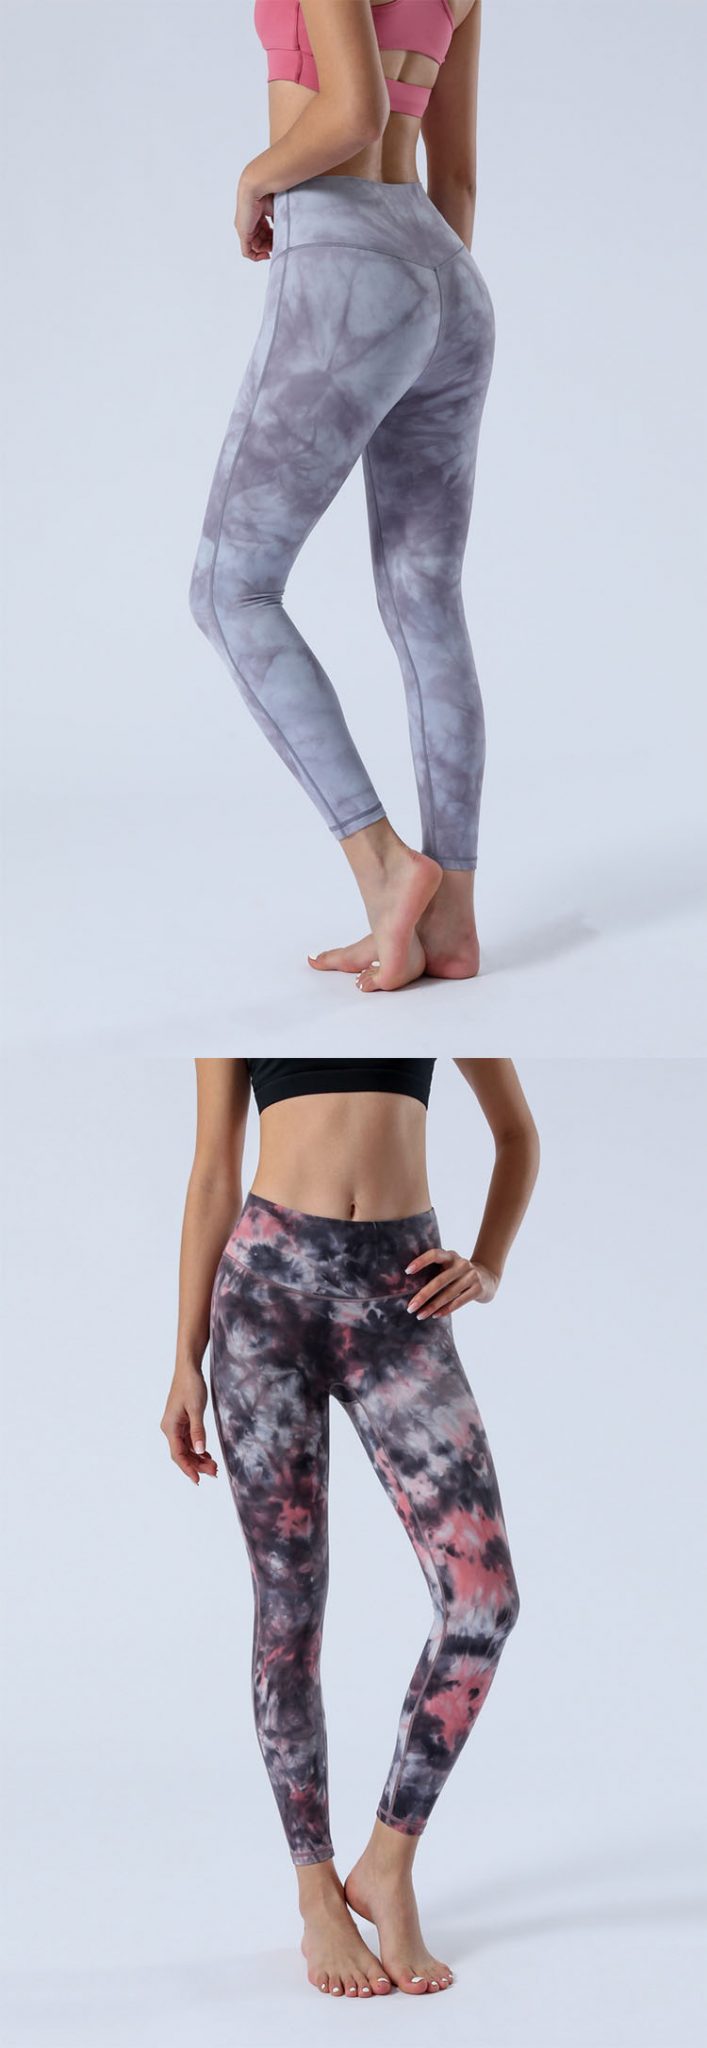 Kamo Fitness High Waisted Yoga Pants 25 Inseam Ellyn Leggings Butt Lifting  Tie Dye Soft Workout Tights